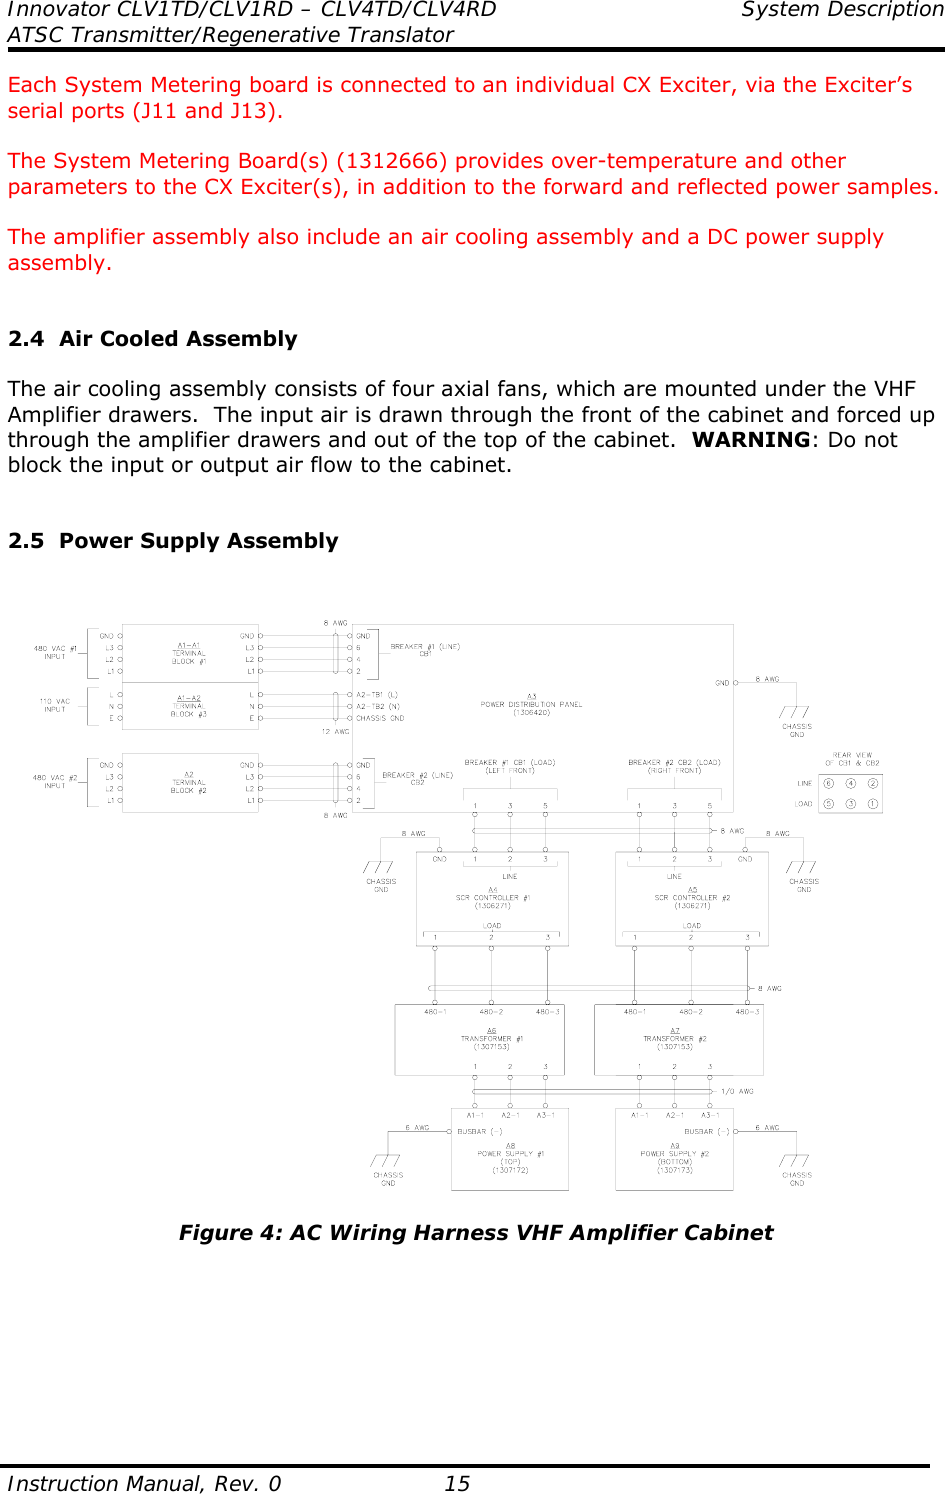 Innovator CLV1TD/CLV1RD – CLV4TD/CLV4RD System Description ATSC Transmitter/Regenerative Translator  Instruction Manual, Rev. 0  15 Each System Metering board is connected to an individual CX Exciter, via the Exciter’s serial ports (J11 and J13).  The System Metering Board(s) (1312666) provides over-temperature and other parameters to the CX Exciter(s), in addition to the forward and reflected power samples.  The amplifier assembly also include an air cooling assembly and a DC power supply assembly.   2.4  Air Cooled Assembly  The air cooling assembly consists of four axial fans, which are mounted under the VHF Amplifier drawers.  The input air is drawn through the front of the cabinet and forced up through the amplifier drawers and out of the top of the cabinet.  WARNING: Do not block the input or output air flow to the cabinet.   2.5  Power Supply Assembly    Figure 4: AC Wiring Harness VHF Amplifier Cabinet        